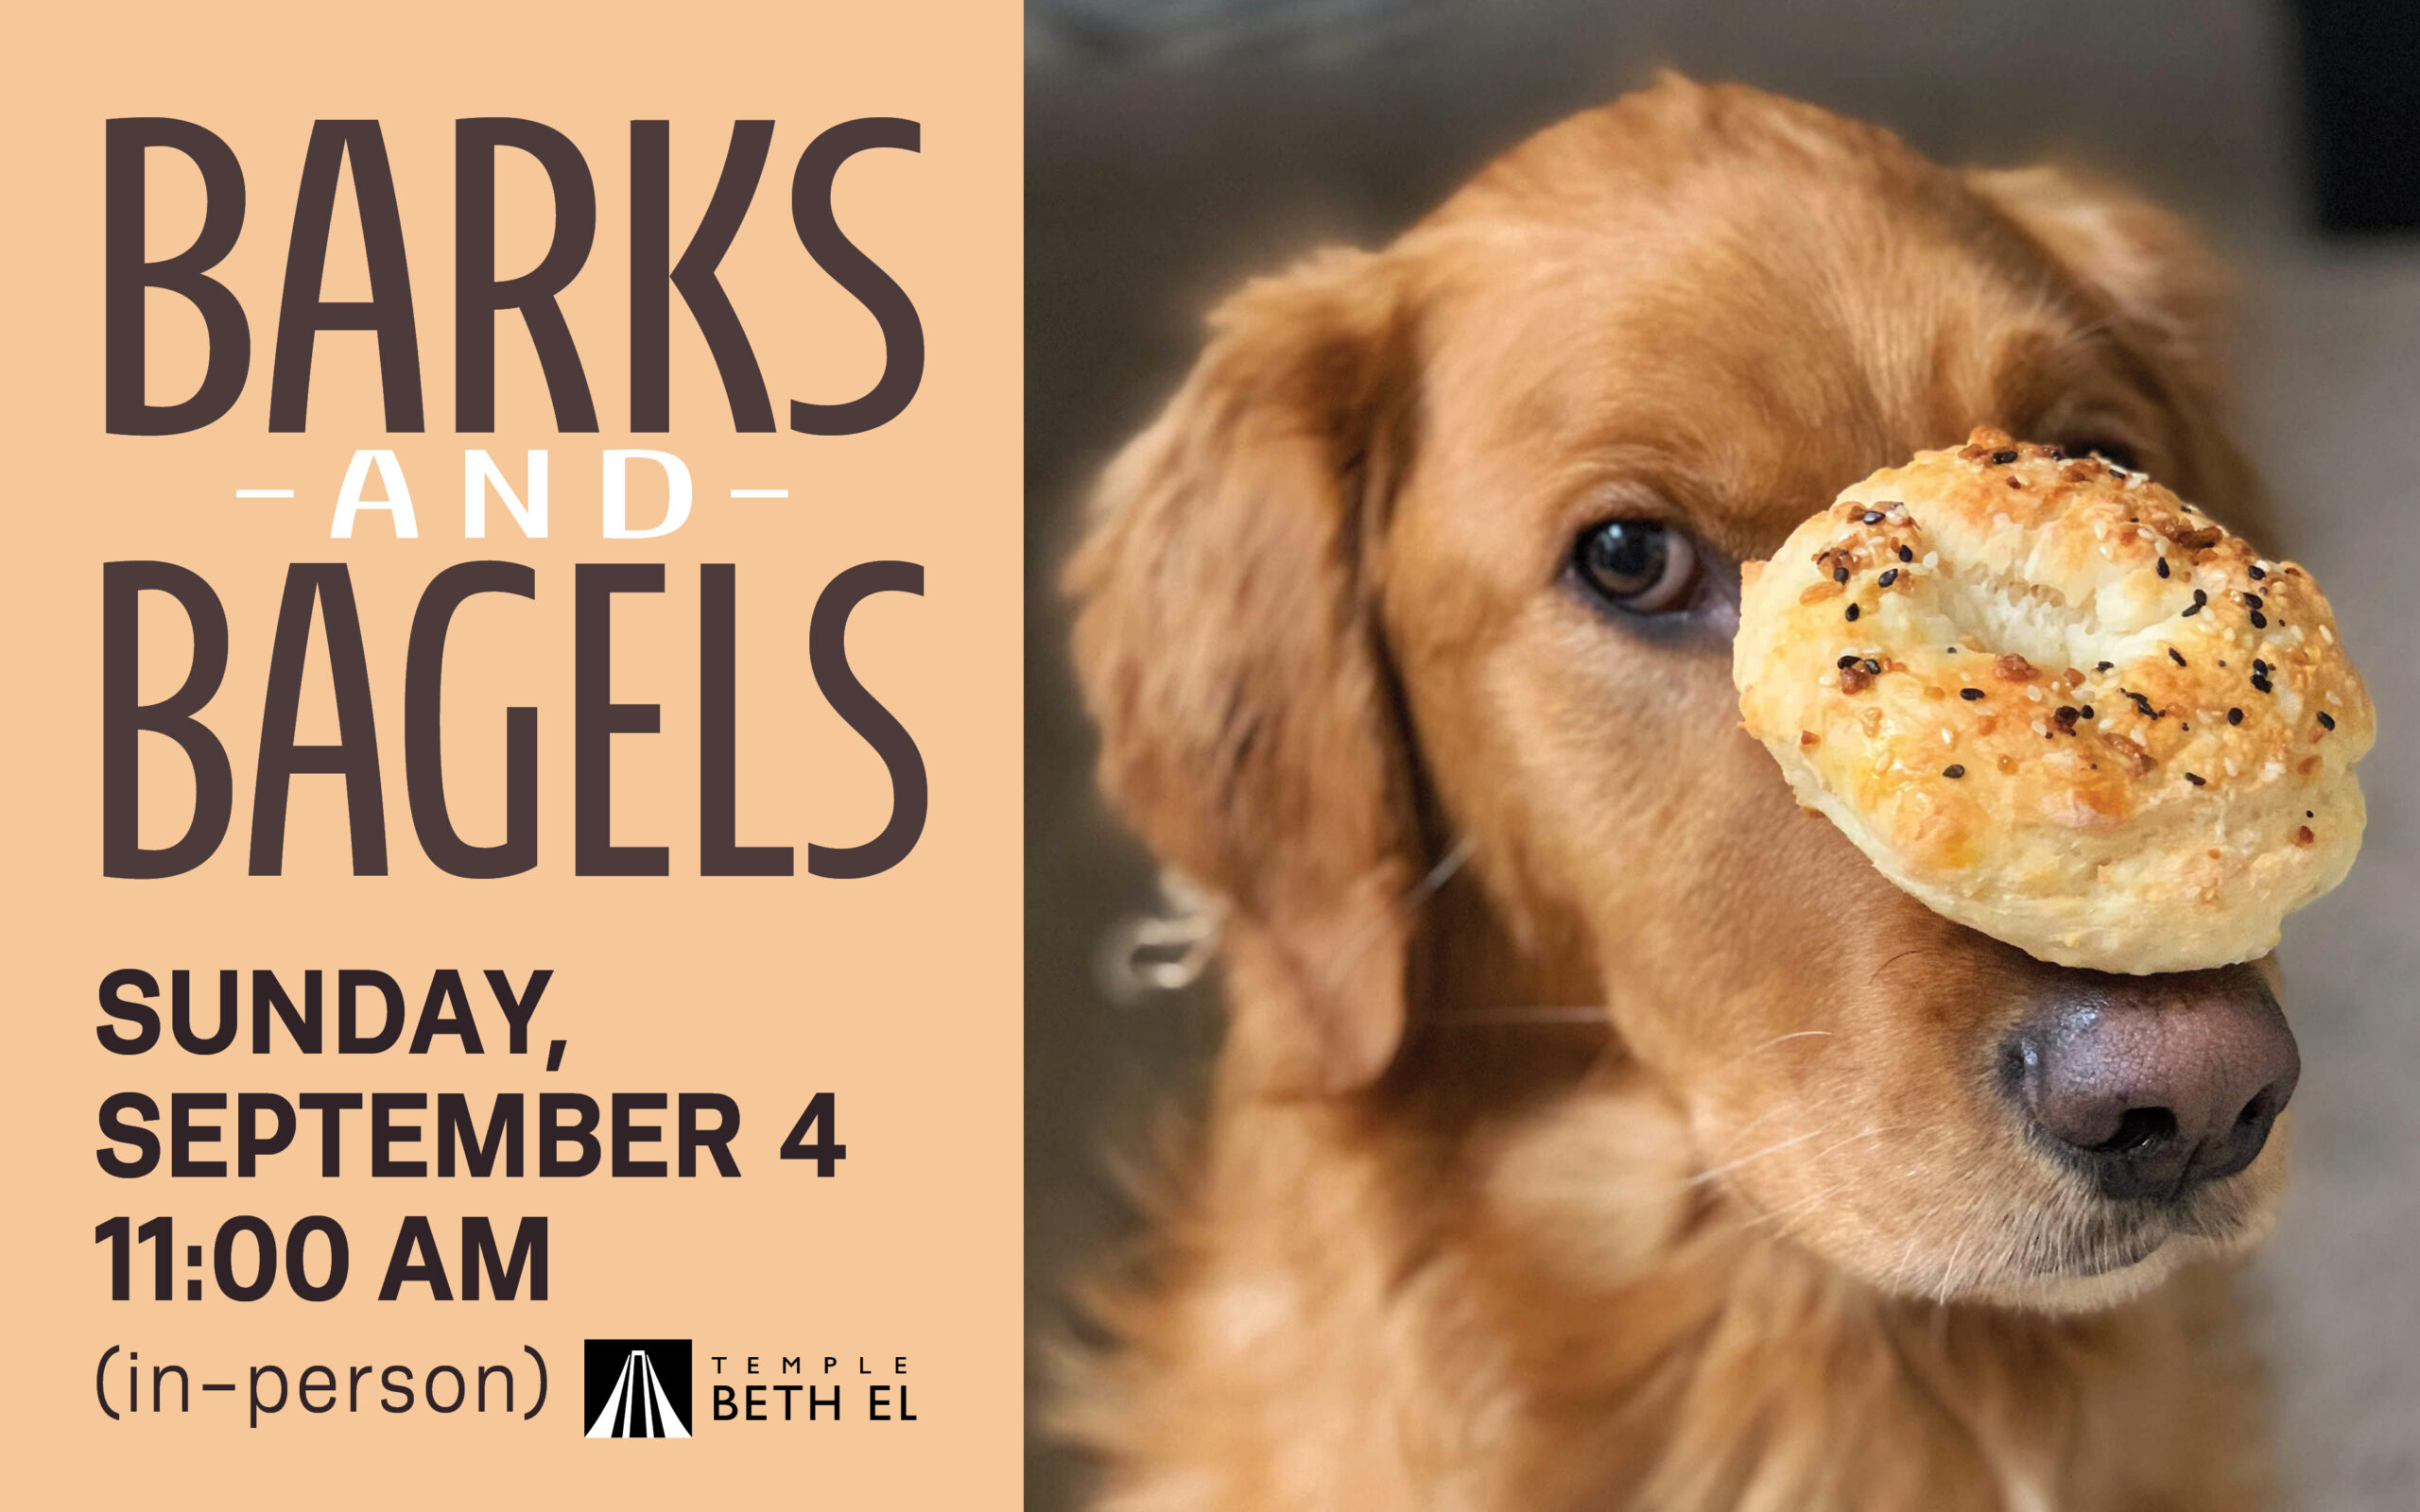 Barks and Bagels